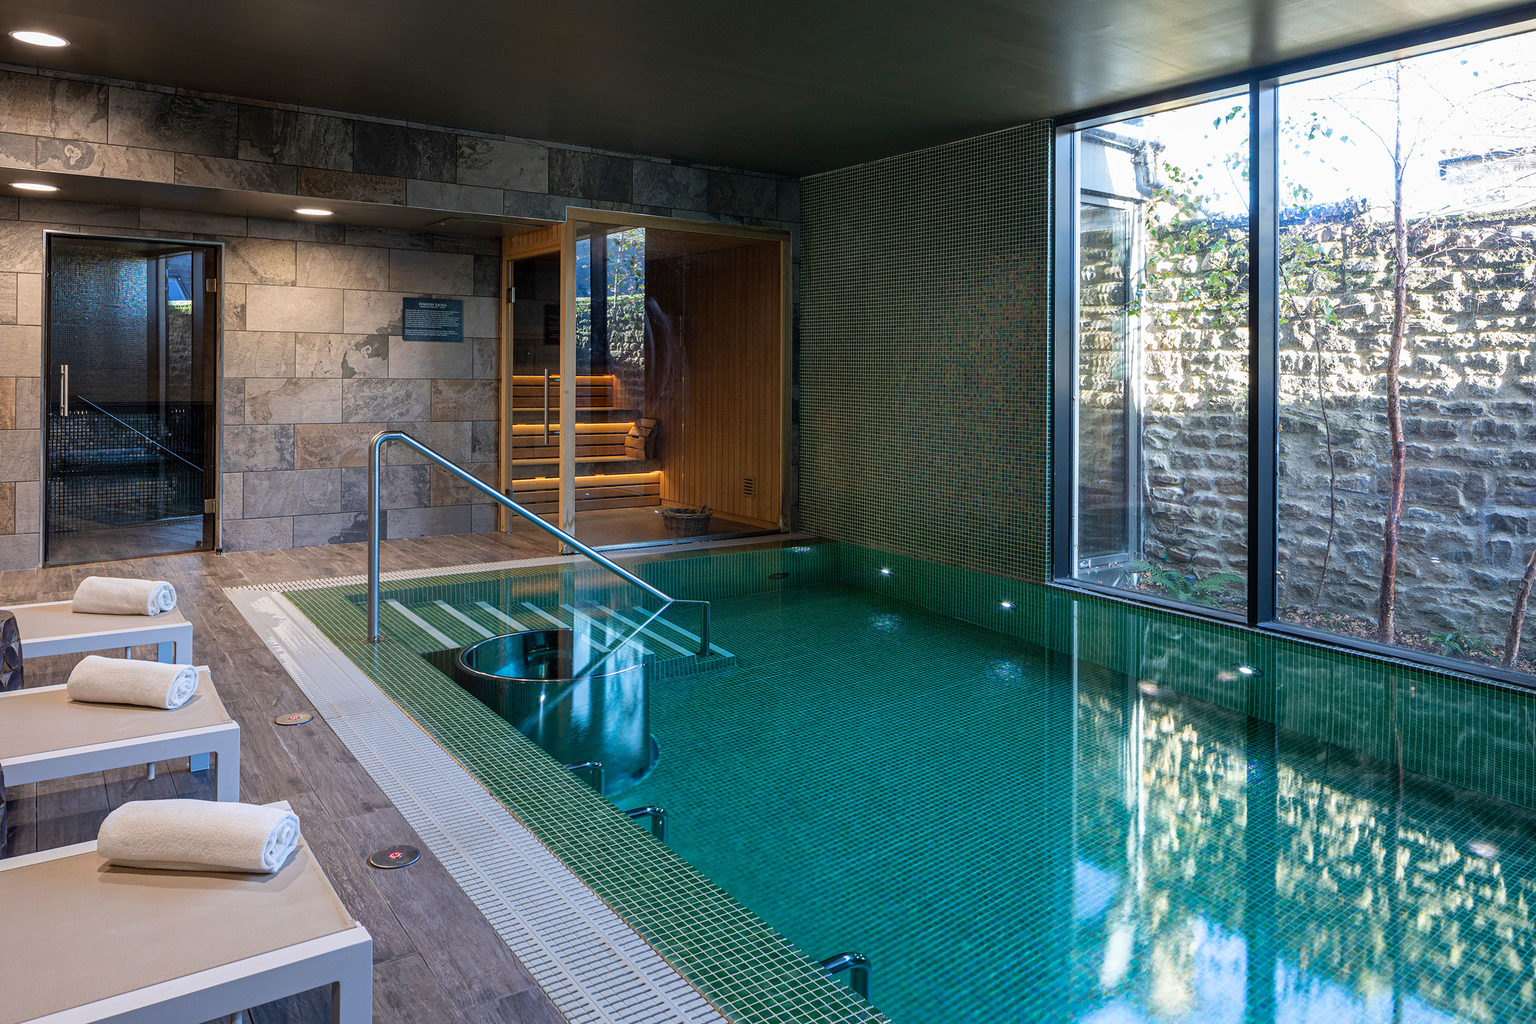 The hydrotherapy pool available to spa day guests in the Swinton Country Club and Spa in North Yorkshire